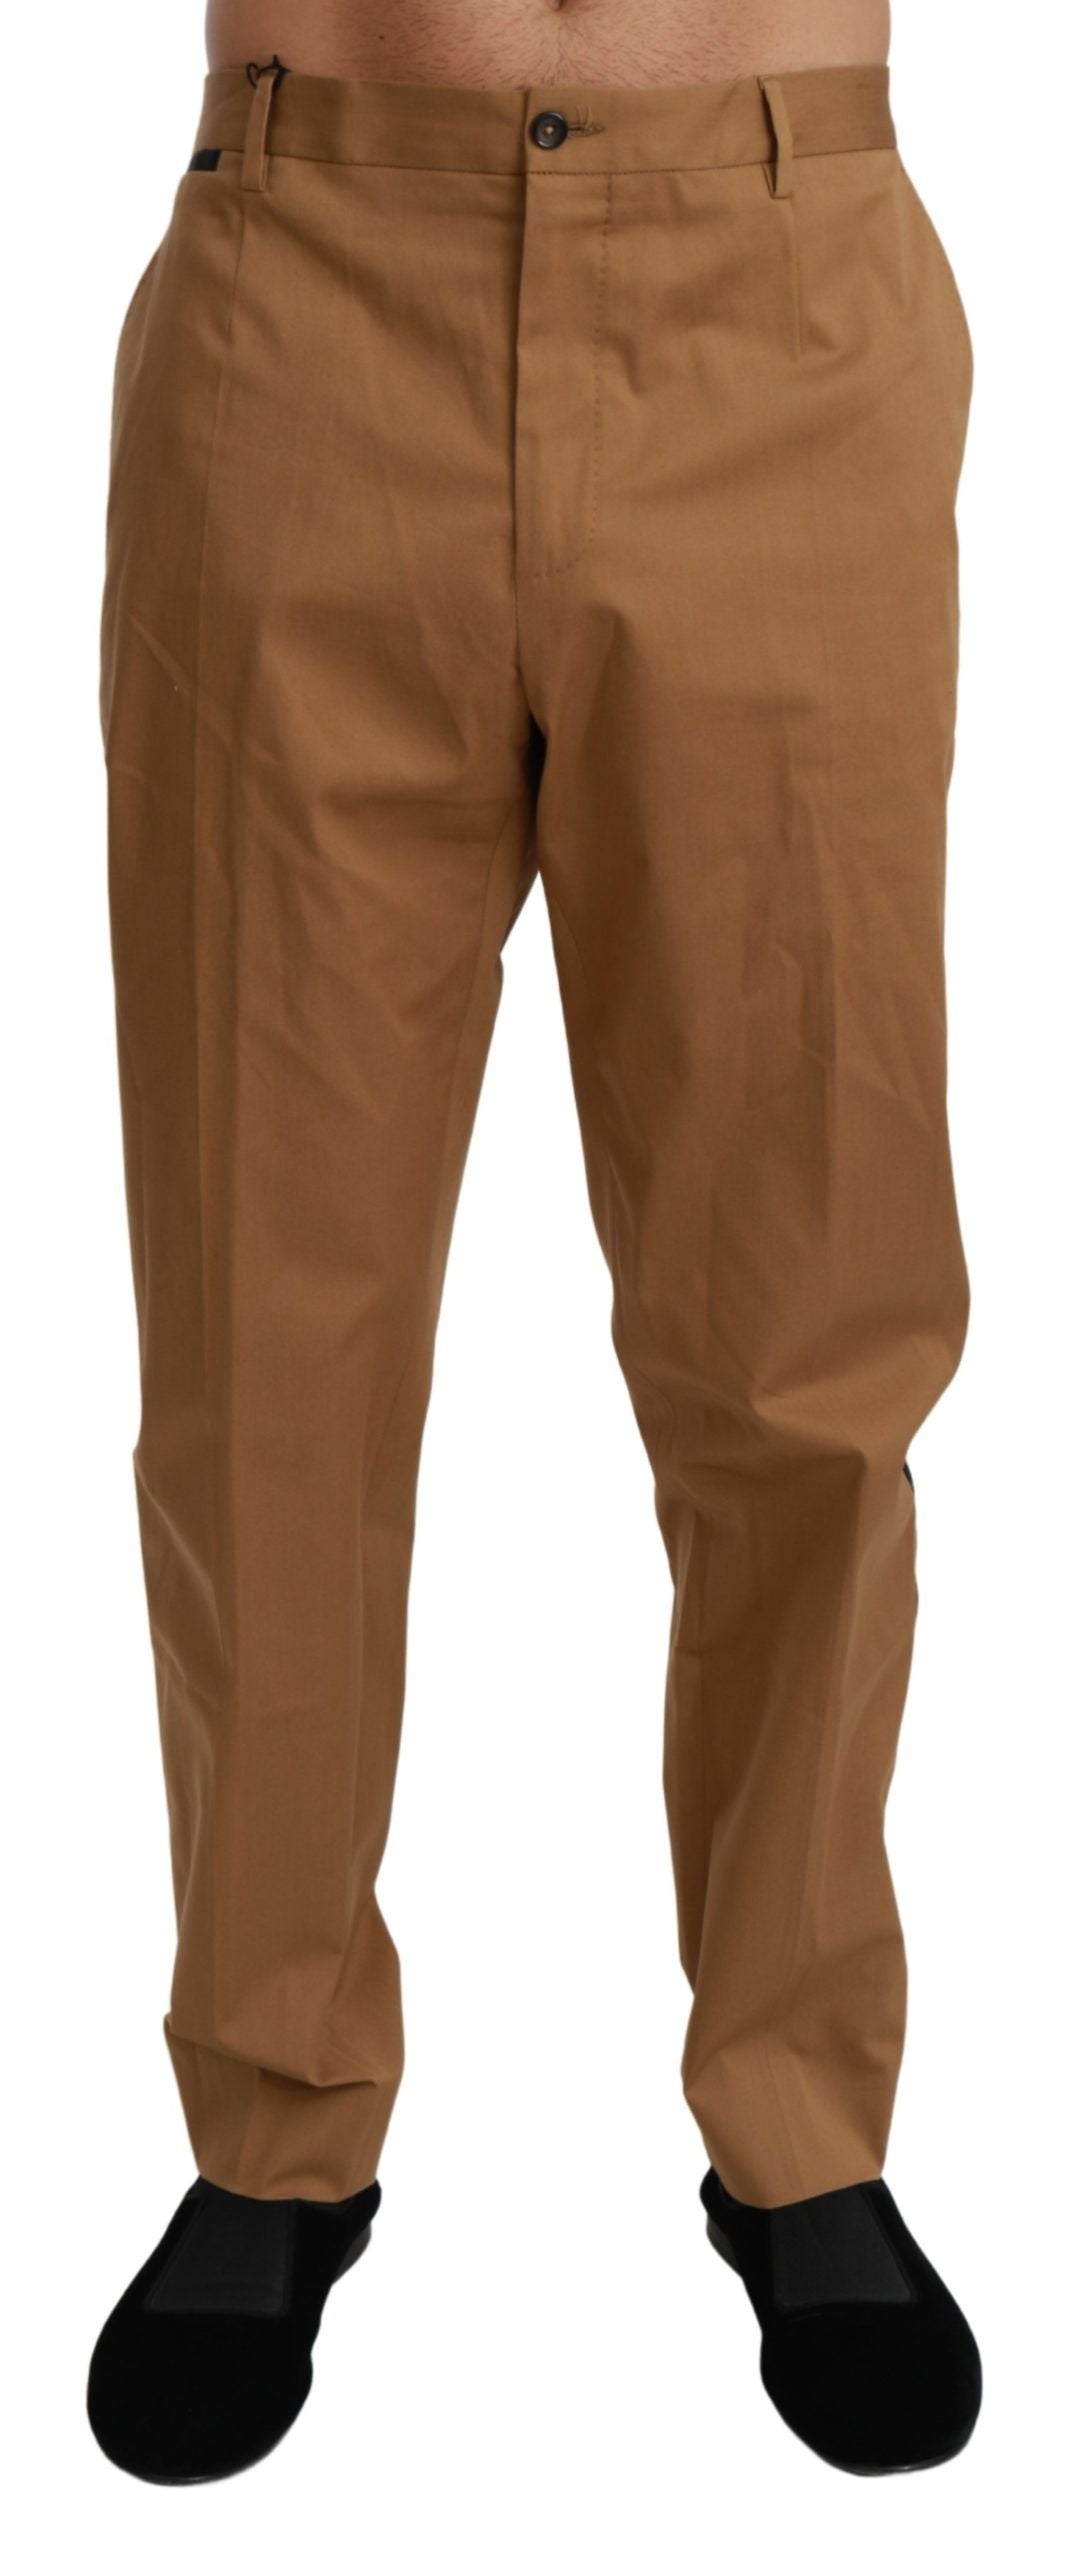 Dolce & Gabbana Brown Chinos Trousers Cotton Stretch Pants